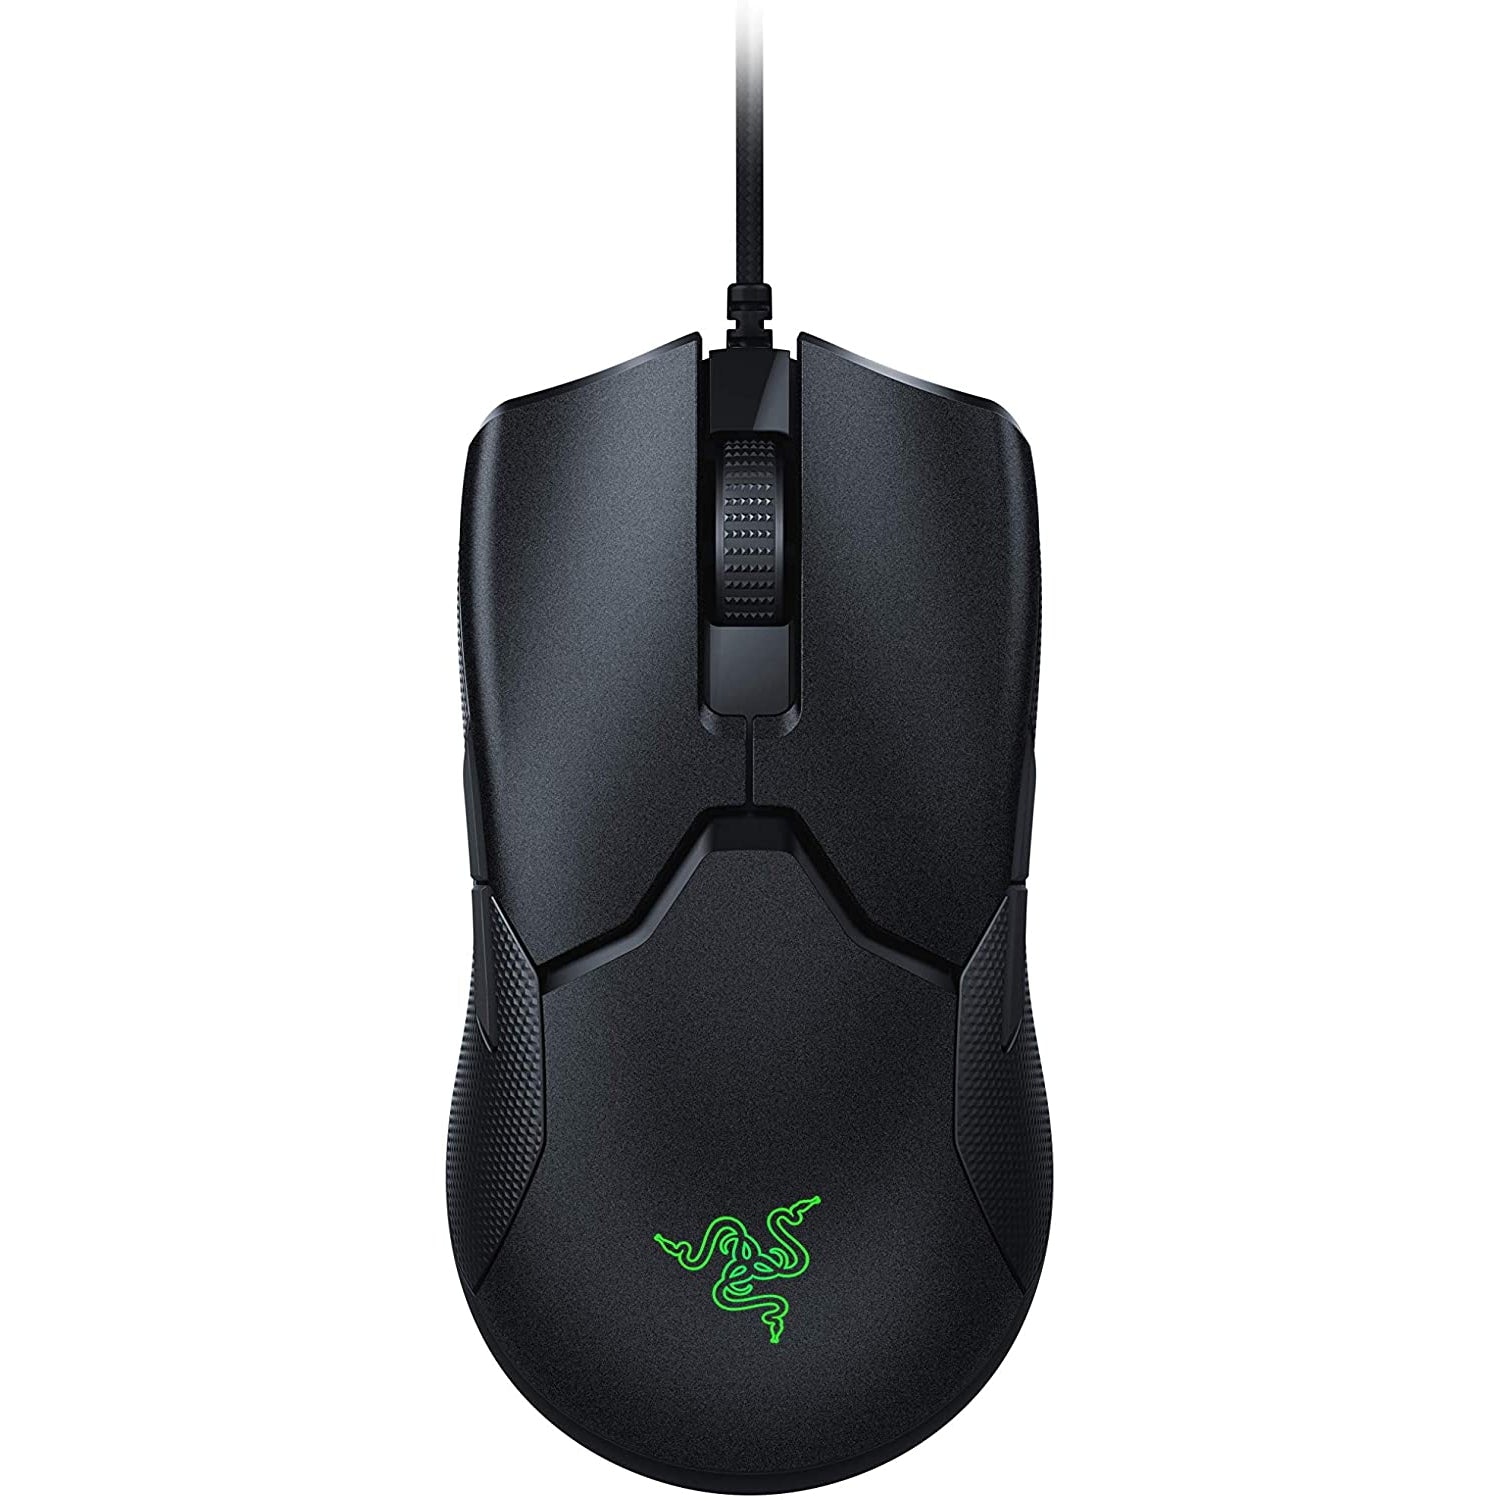 Razer Viper Ambidextrous Wired Gaming Mouse - Black - Refurbished Excellent